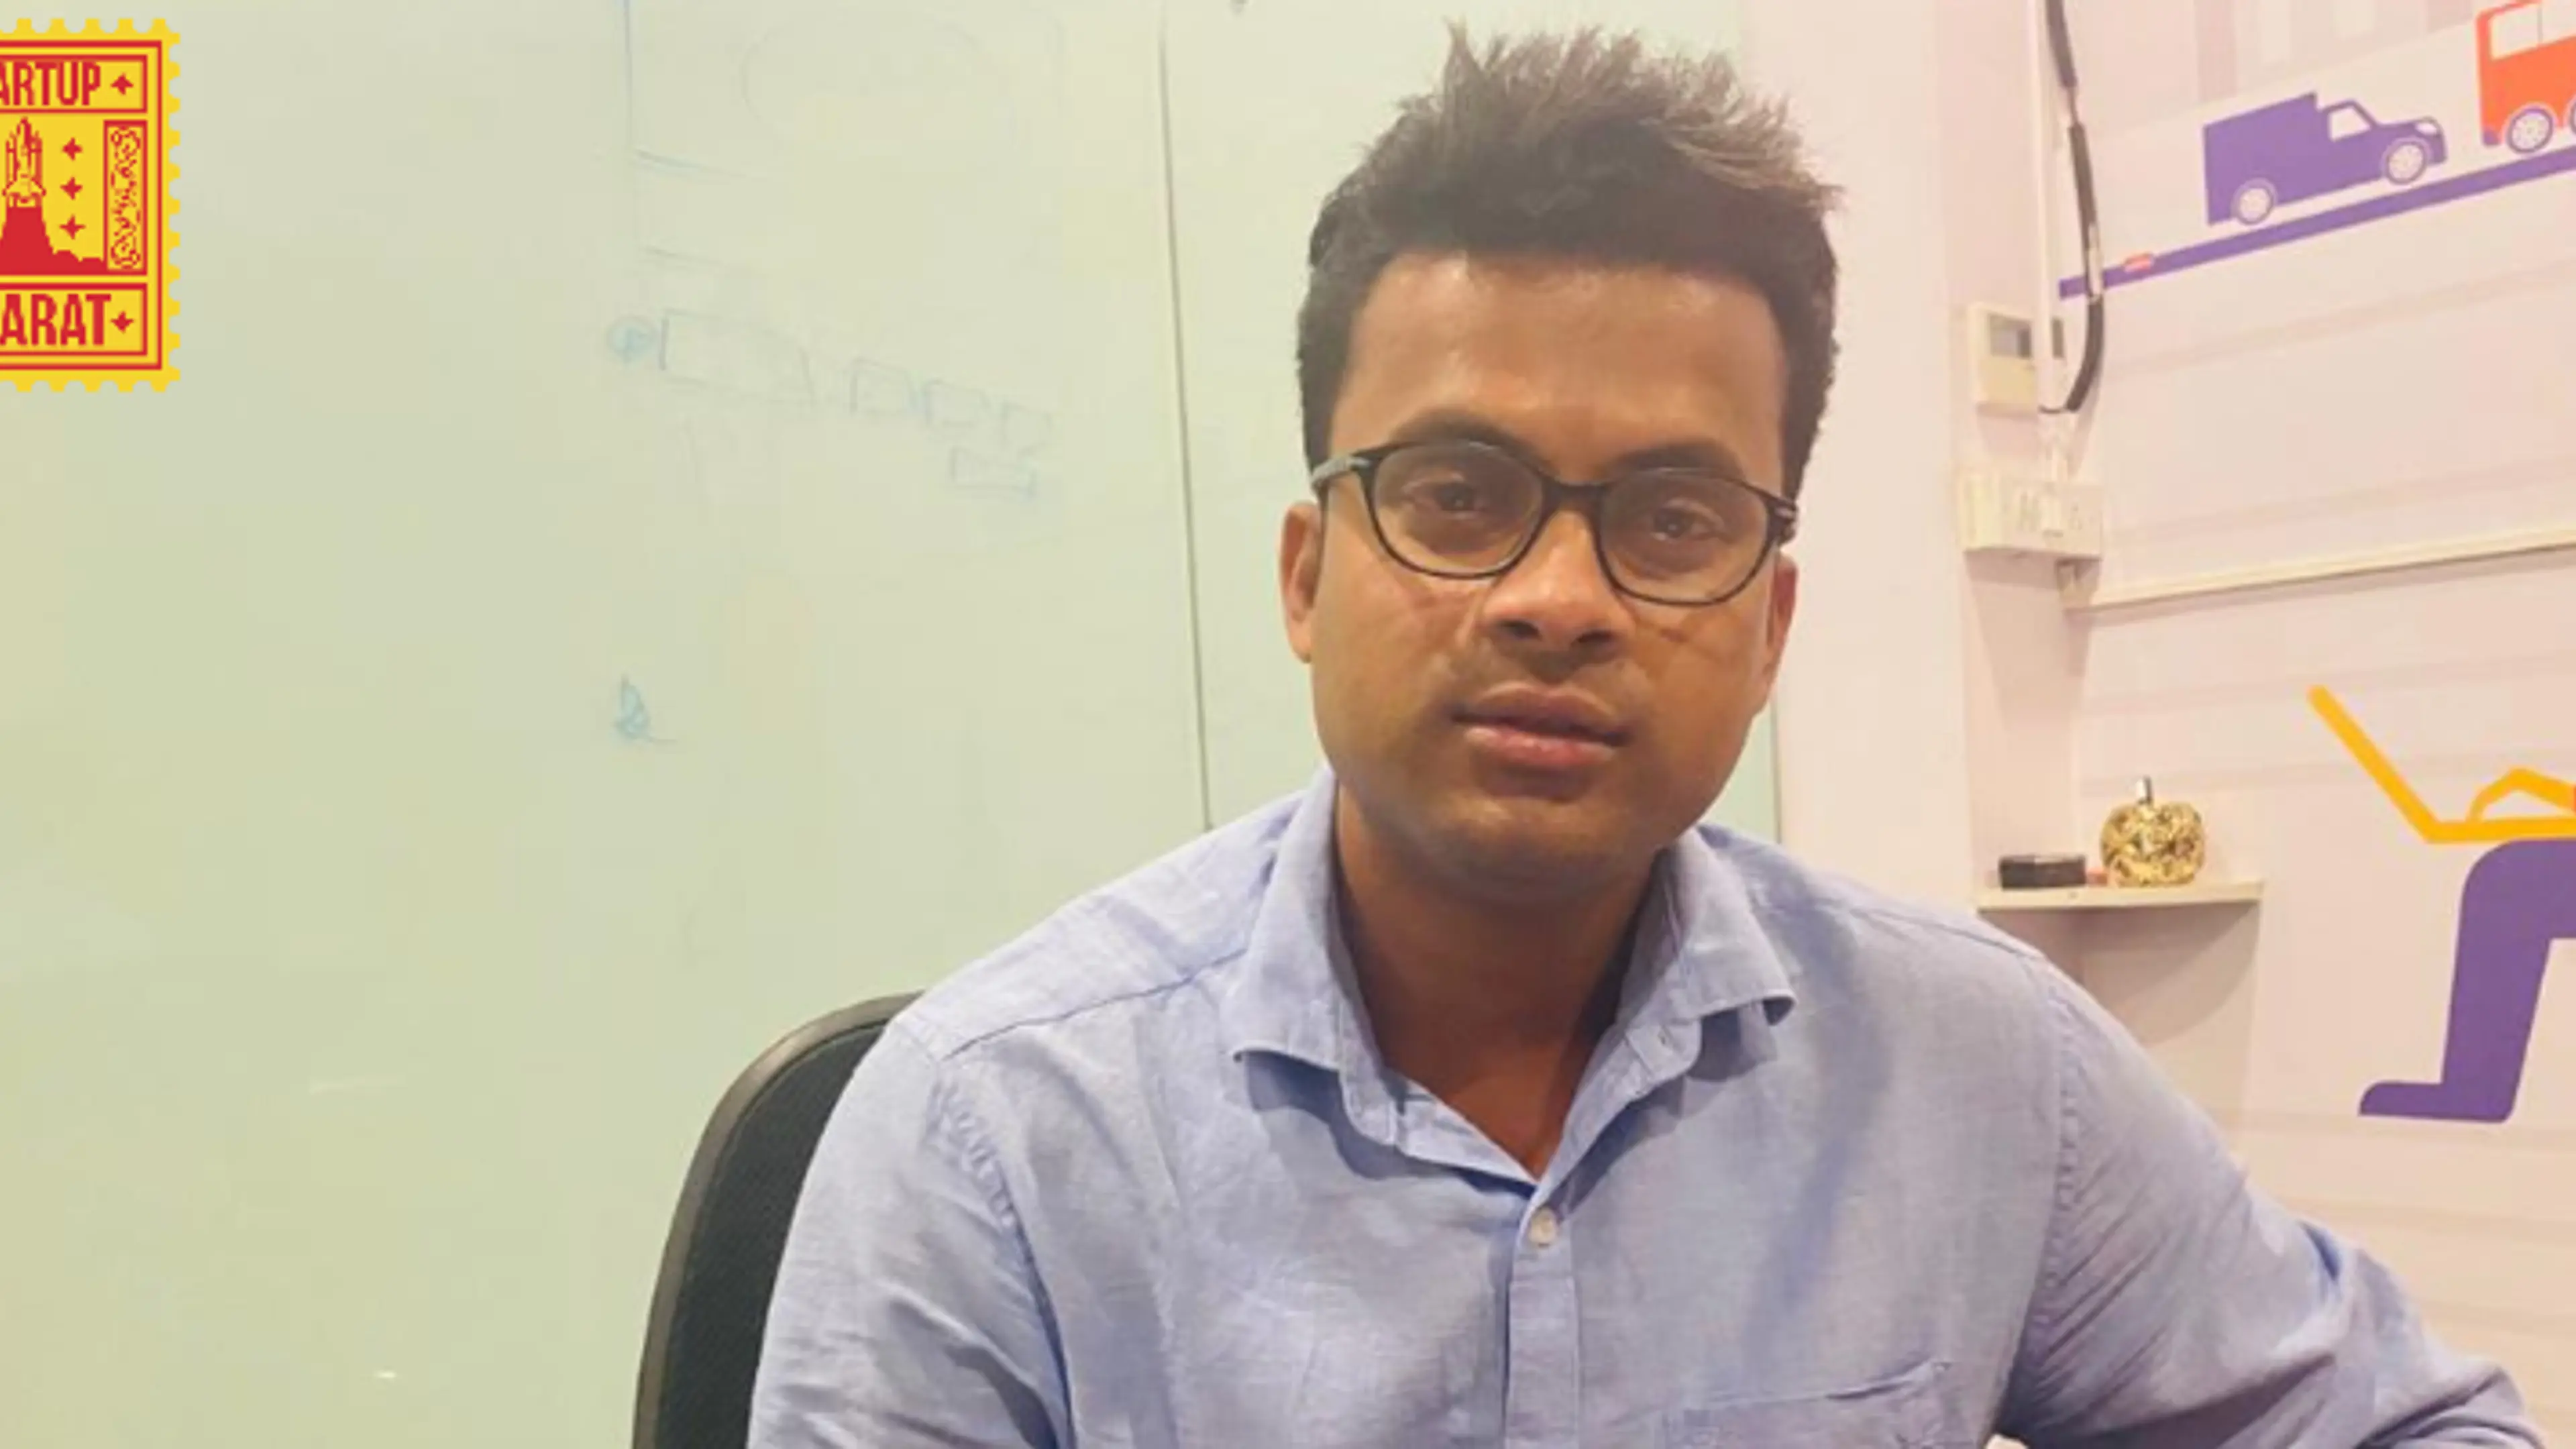 [Startup Bharat] Scared of needles during blood tests? Bhubaneswar startup EzeRx presents the world's first non-invasive treatments